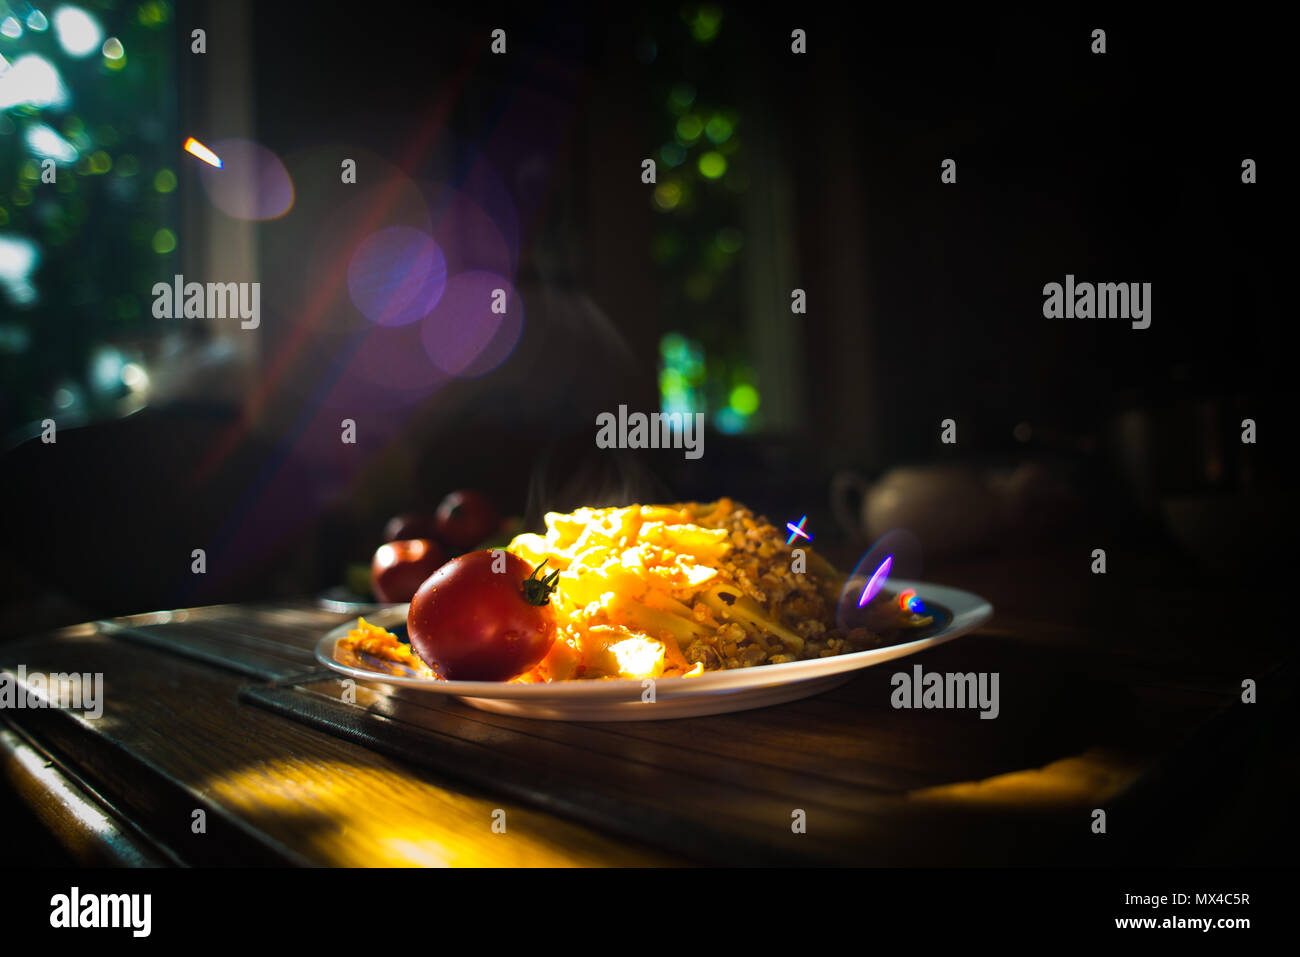 A plate with steamigh hot macaroni (pasta), and red tomato Stock Photo